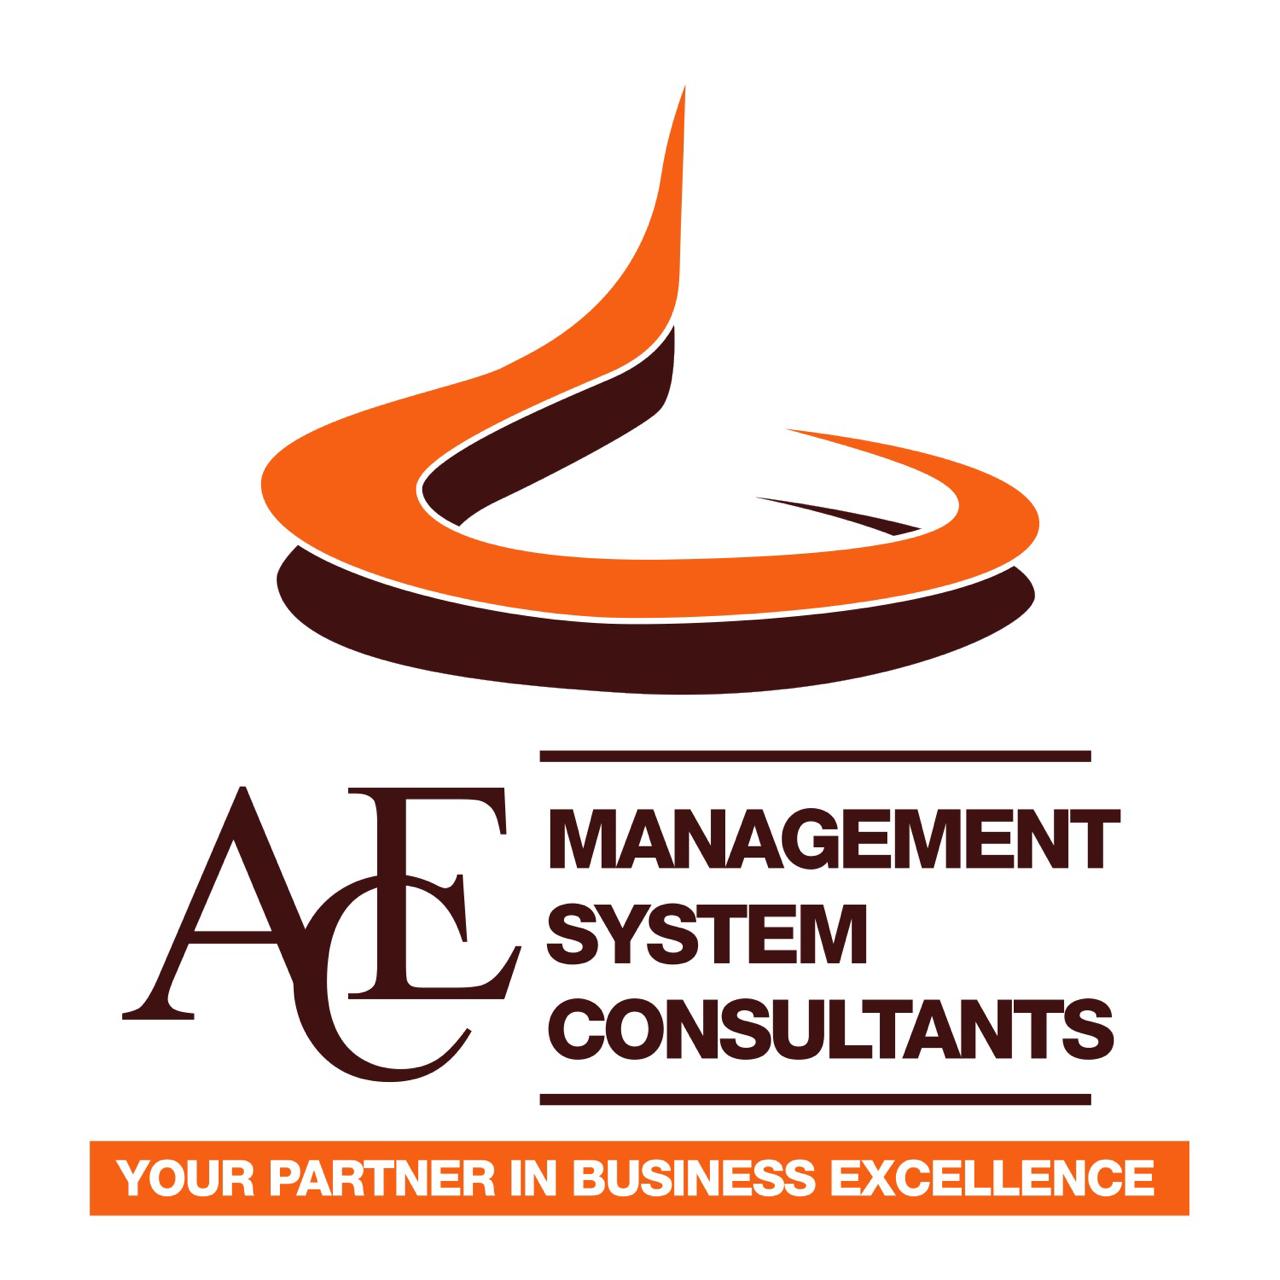 Ace Management System Consultants